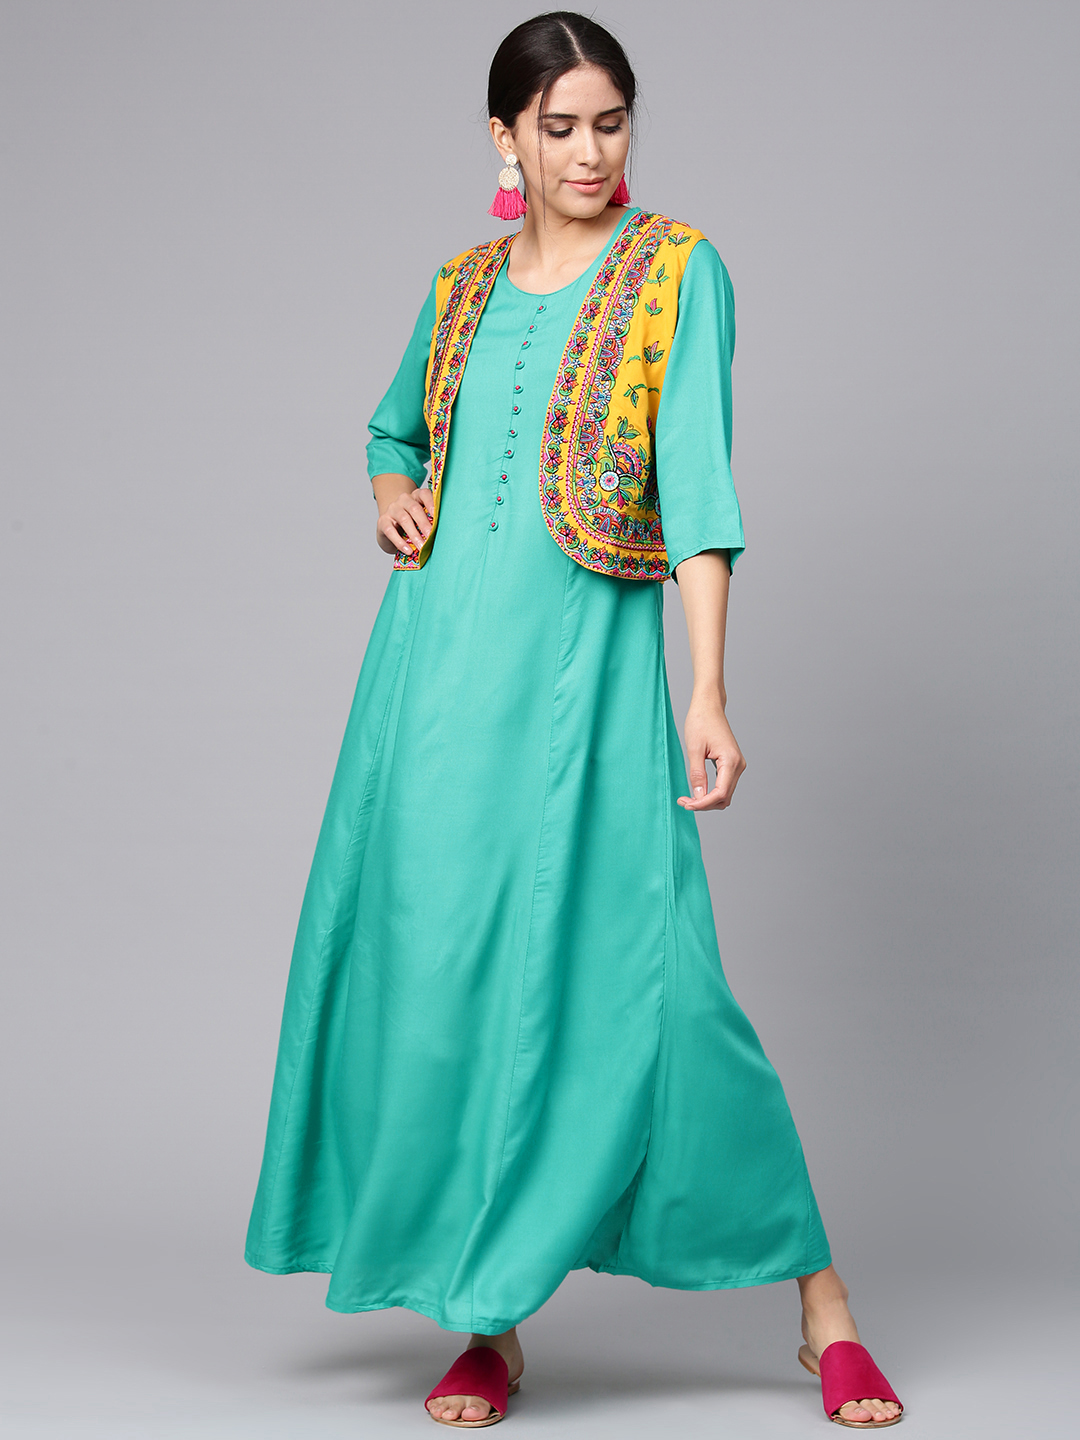 Shree Women Green & Mustard Yellow Solid Maxi Dress with Ethnic Jacket Price in India